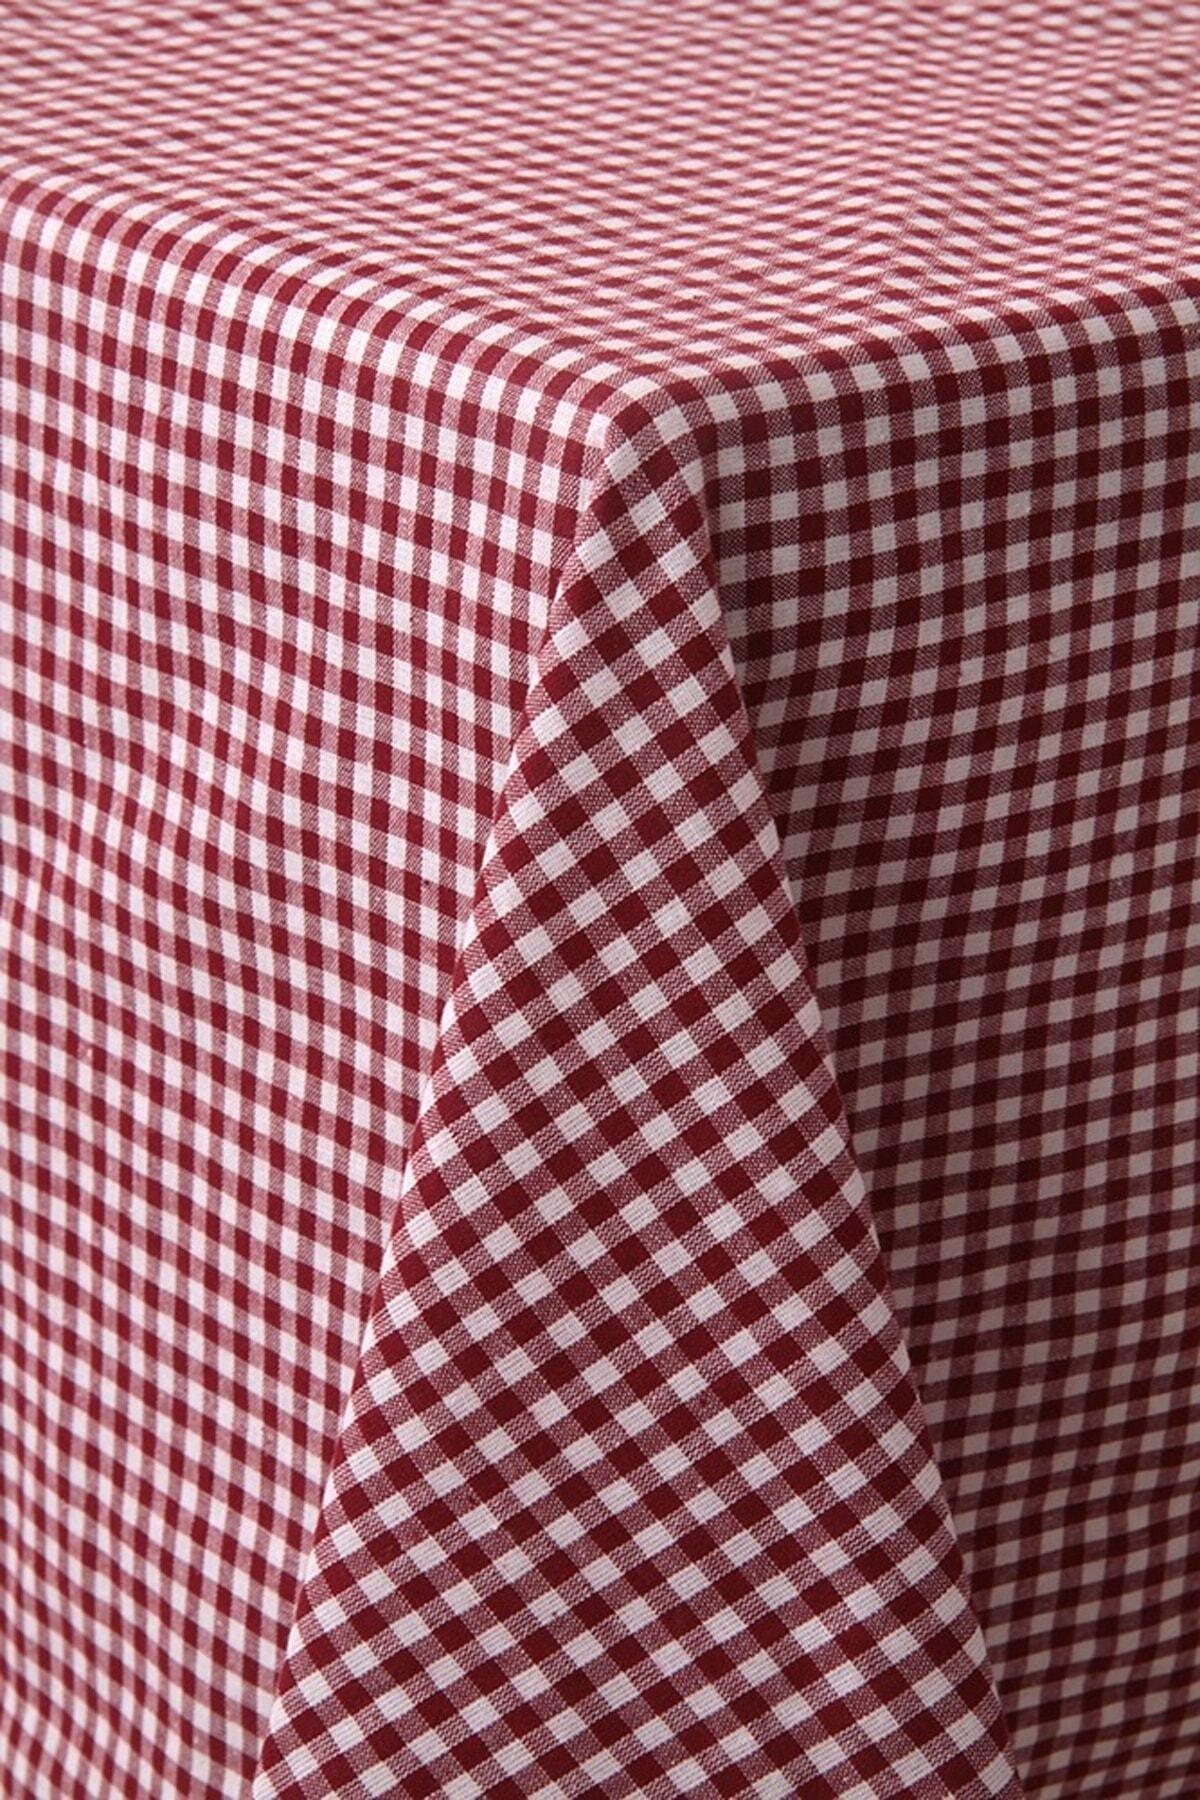 Piti Checkered Claret Red Table Cloth Cotton, Authentic Table Cover, Picnic Cover - Swordslife